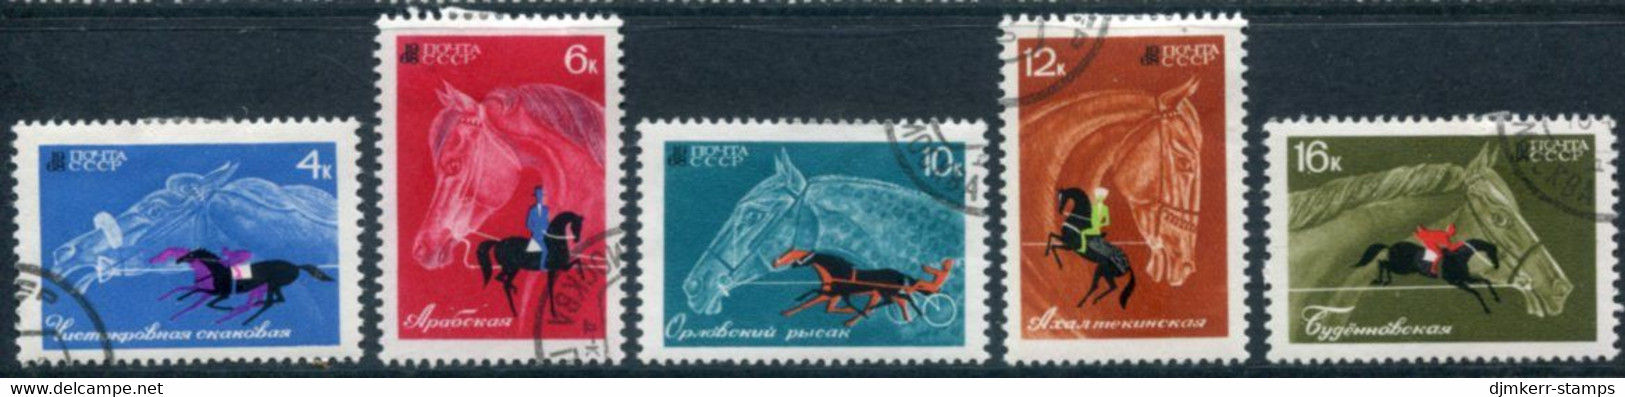 SOVIET UNION 1968 Equestrian Sports Used.  Michel 3458-62 - Used Stamps